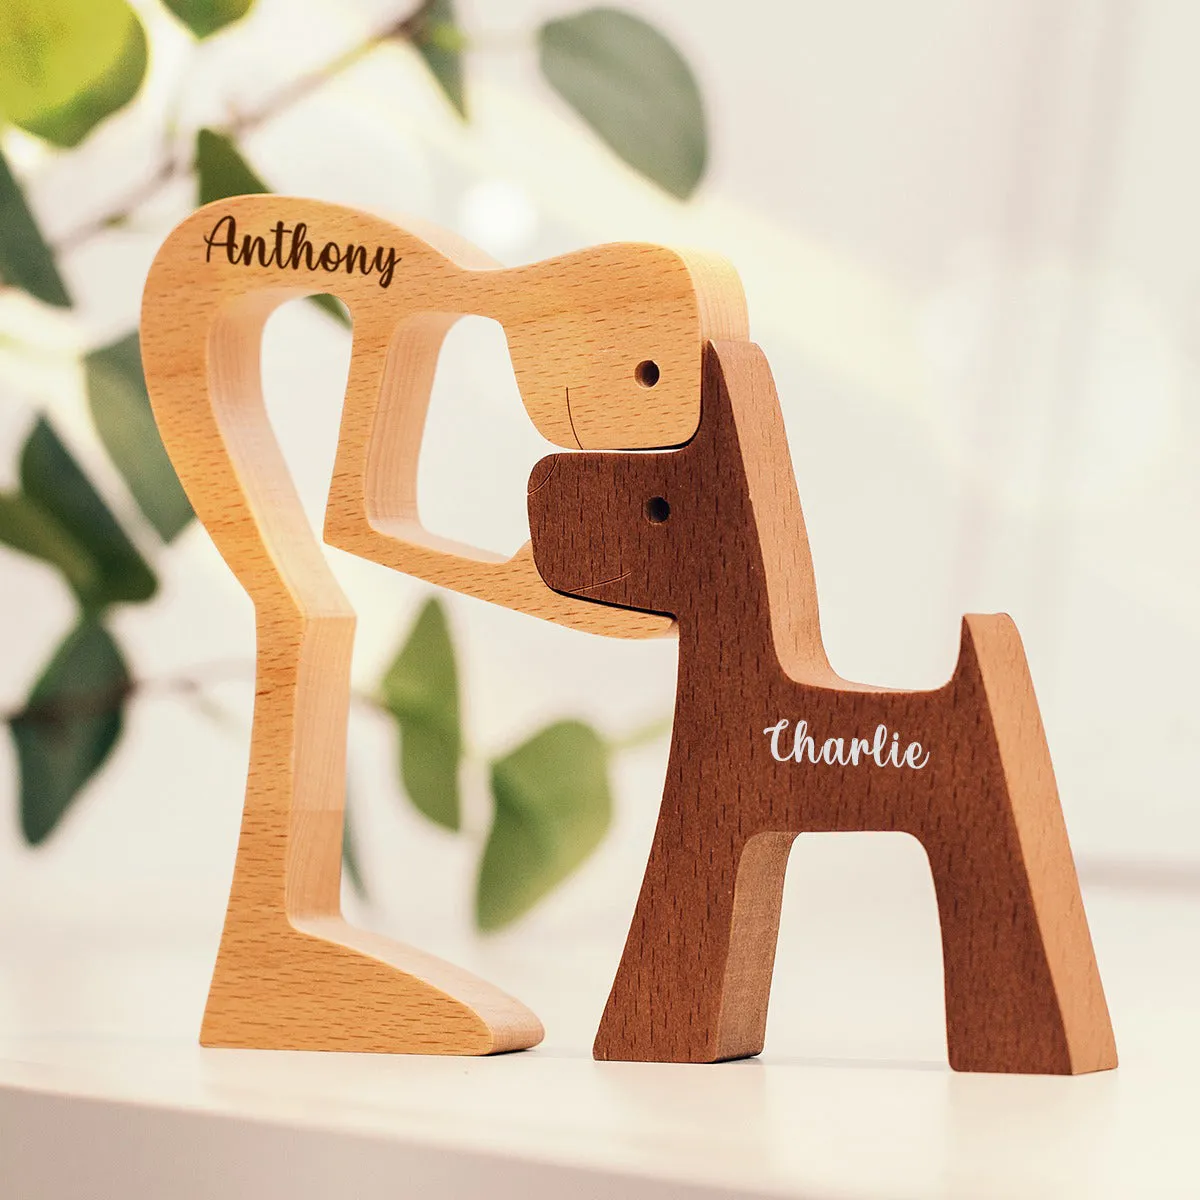 Personalized Custom Wooden Pet Carvings - The Love Between You And Your Fur-Friend